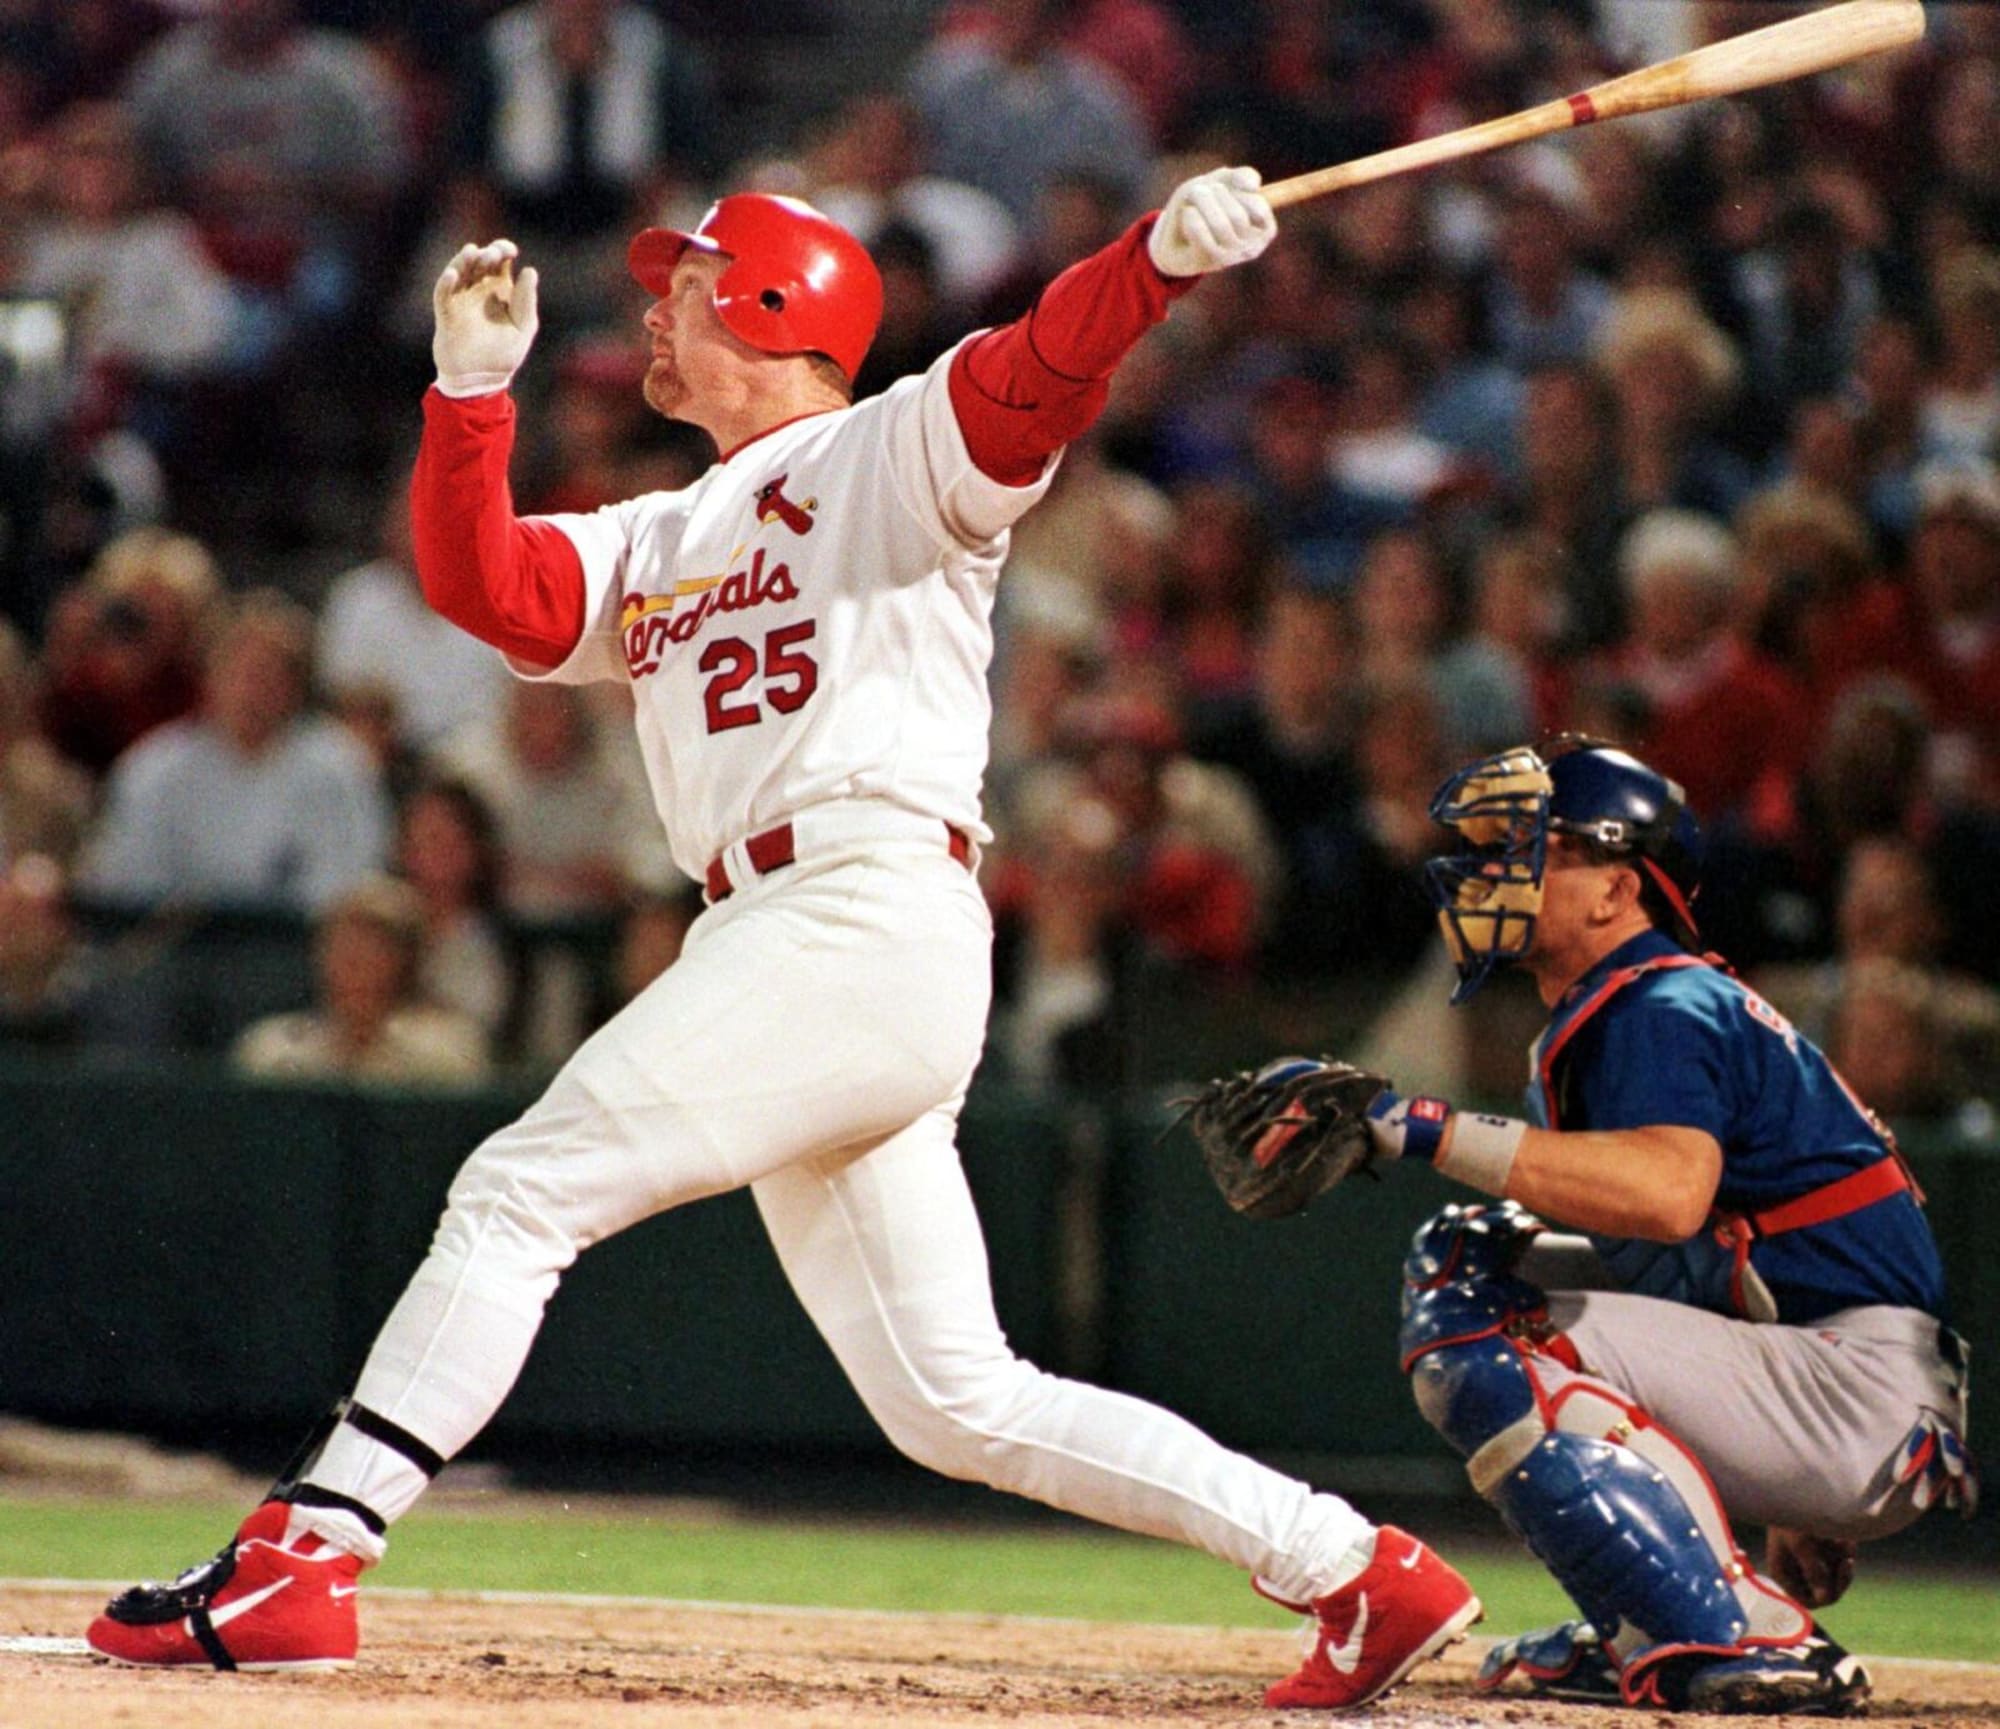 Cardinals: Mark McGwire’s 70th home run ball once sold for $3 million